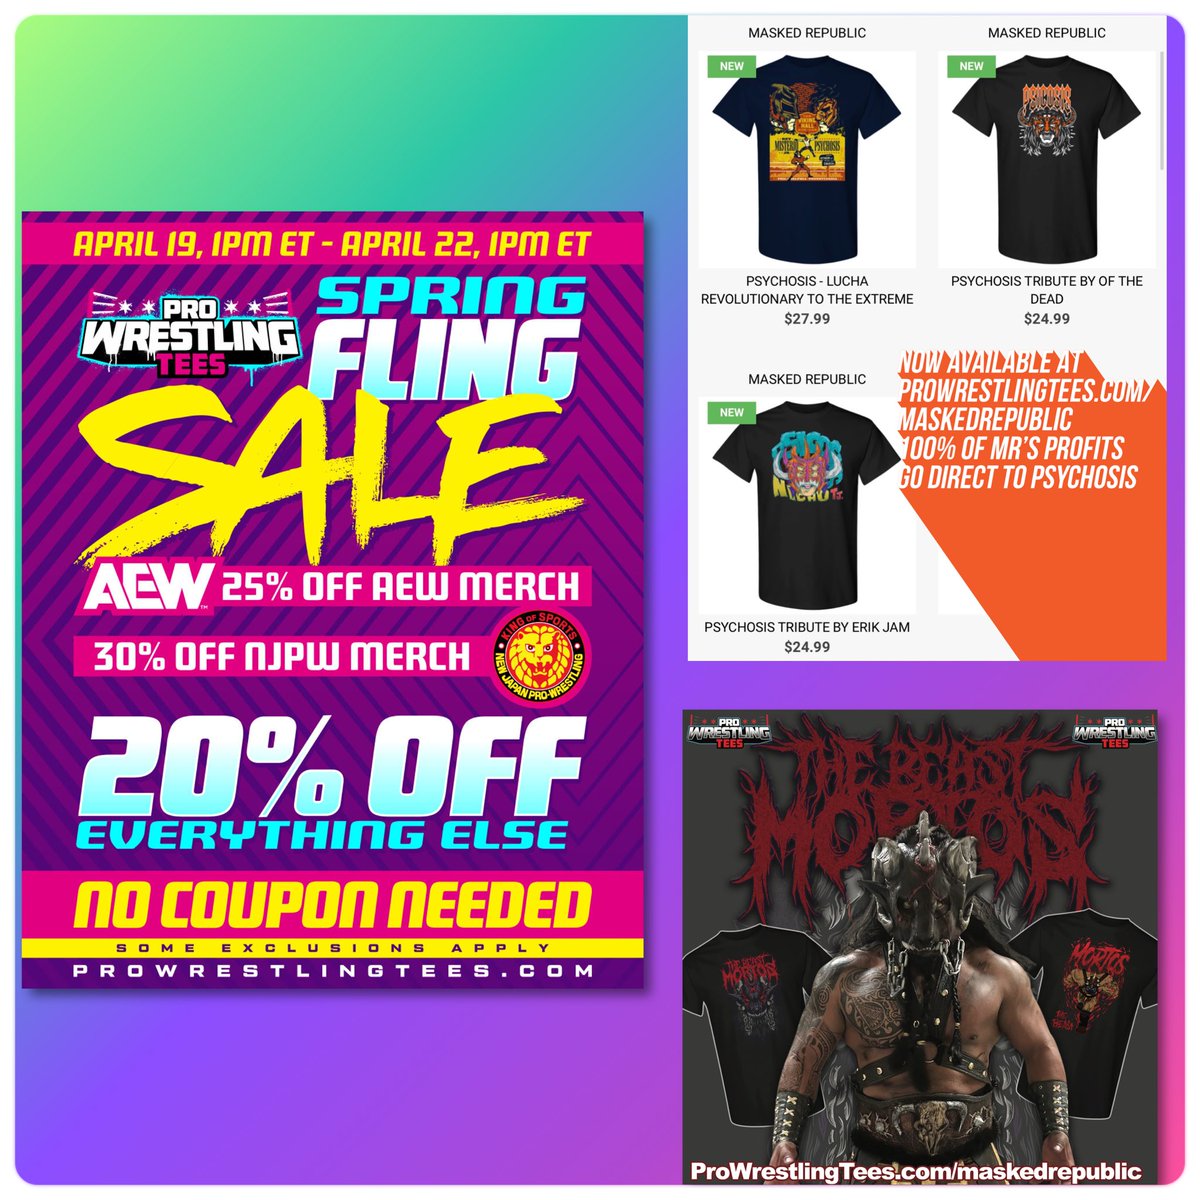 ALL of our tees are 20% off this weekend at @PWTees including the @PsicosisOficial fundraiser tees and the brand new @Taurusoriginal Beast Mortos debut tees!